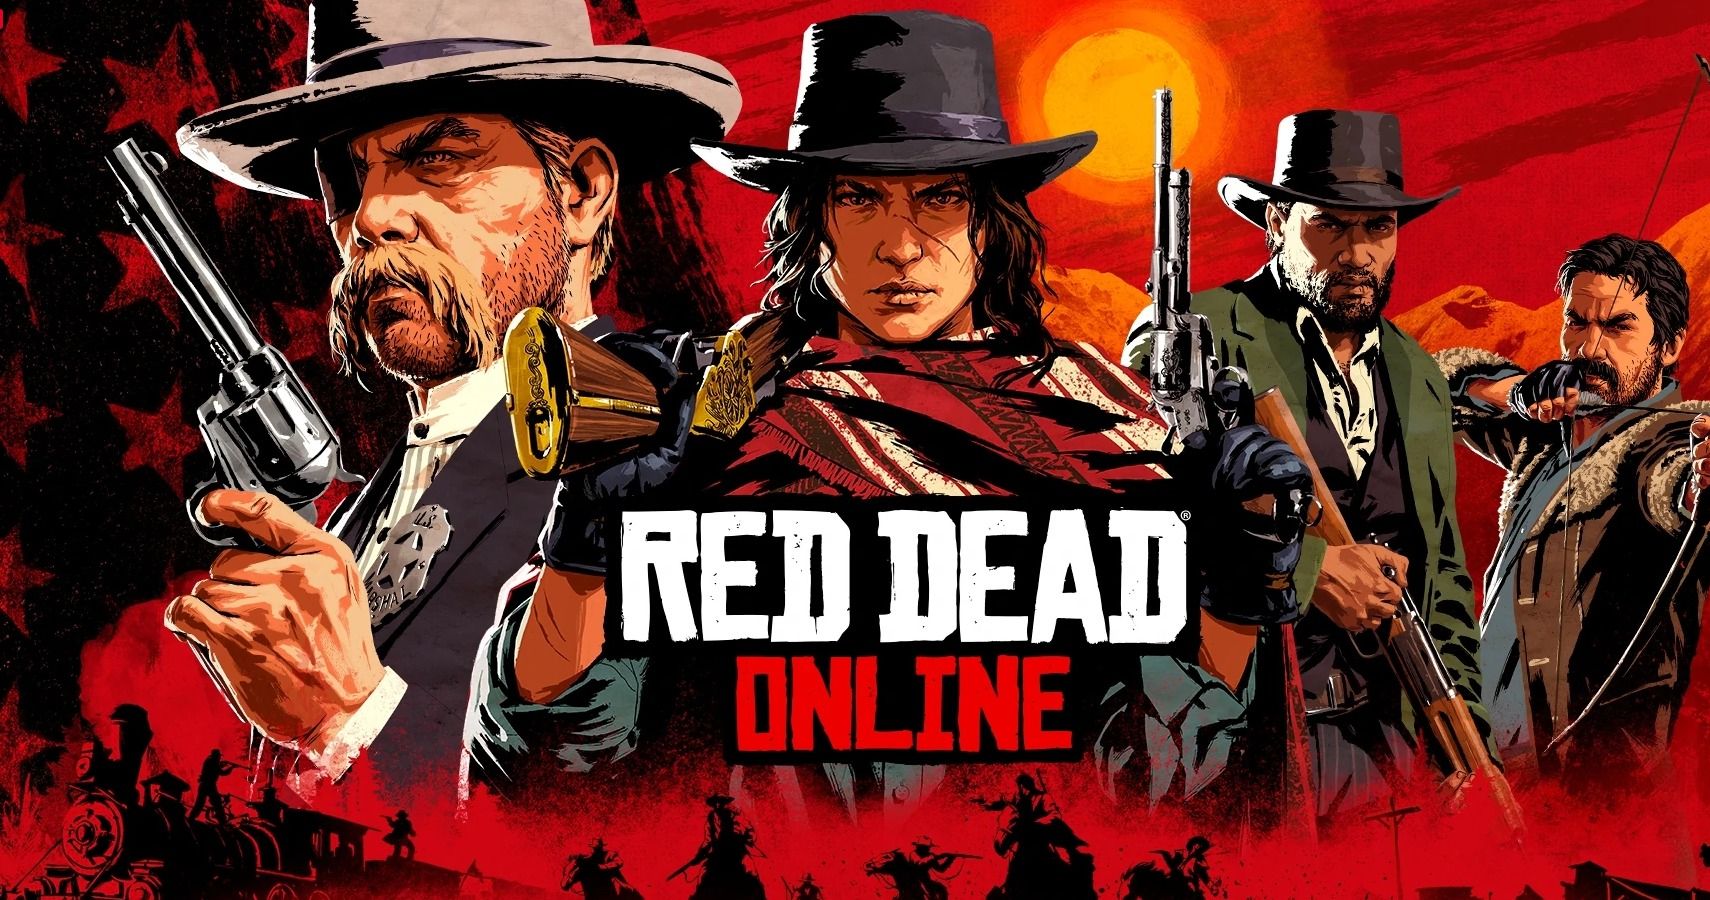 Red Dead Online tips: 26 essential tips to know before you play